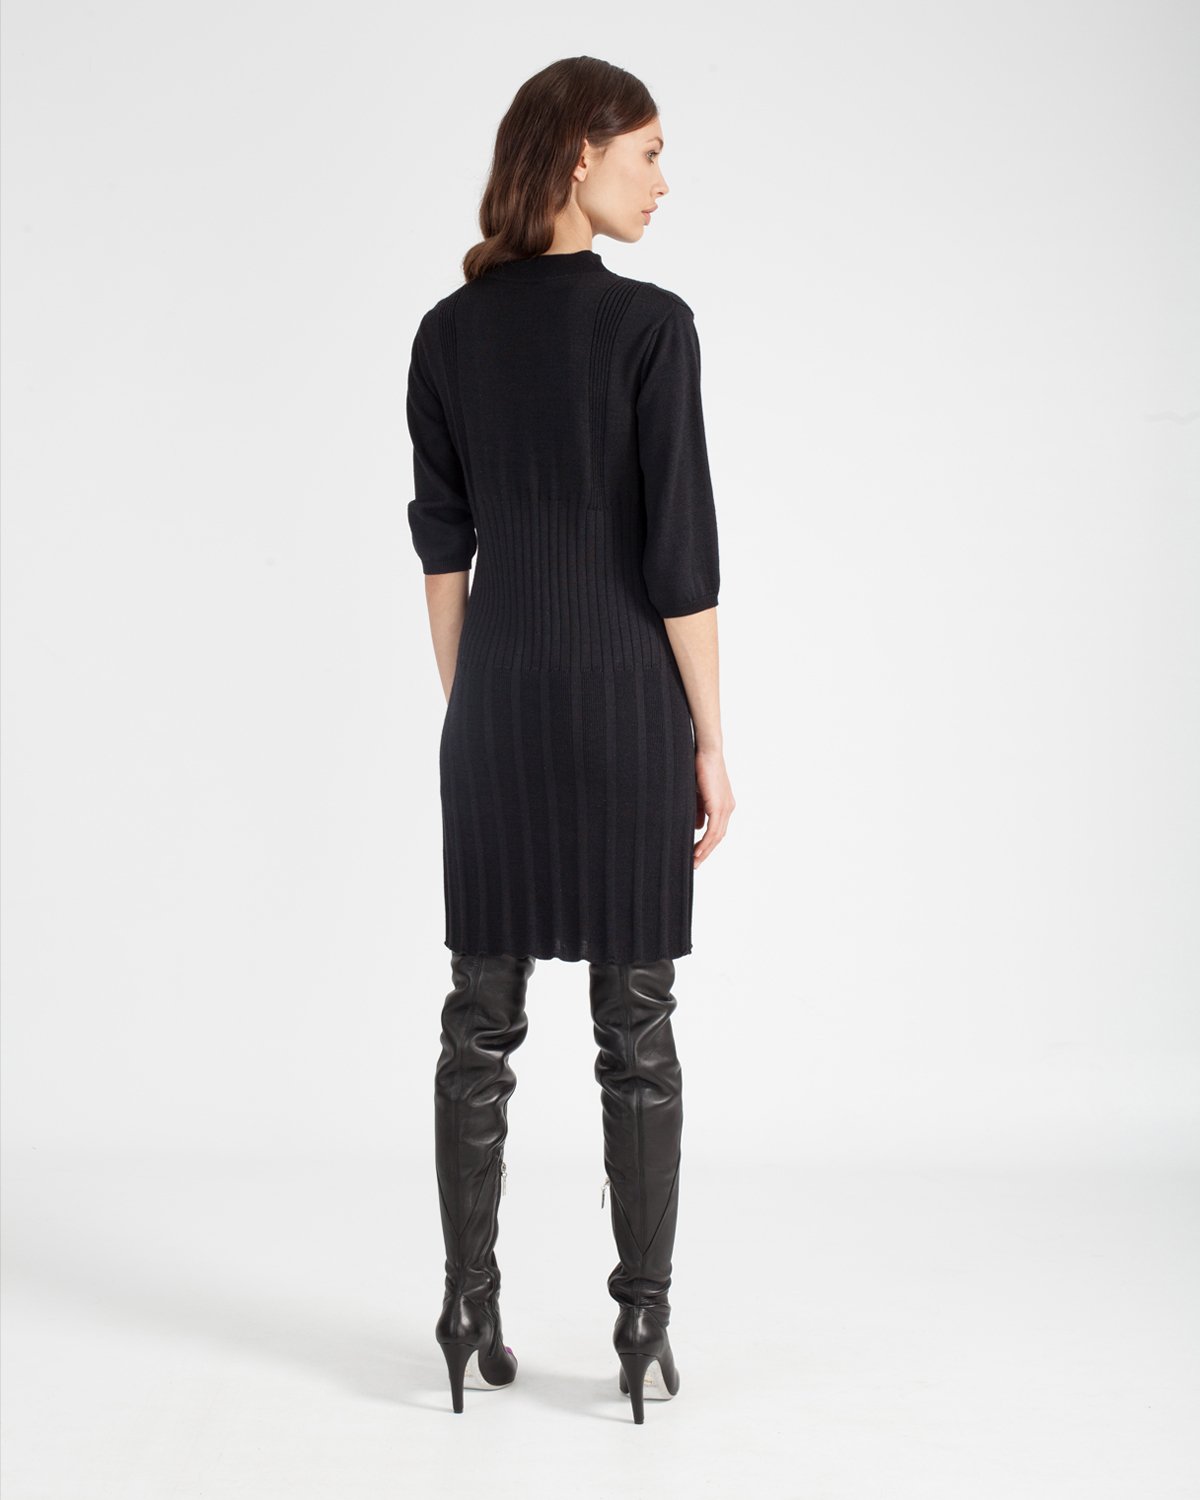 Black knit minidress with 3/4 sleeves | Sale, -40% | Genny